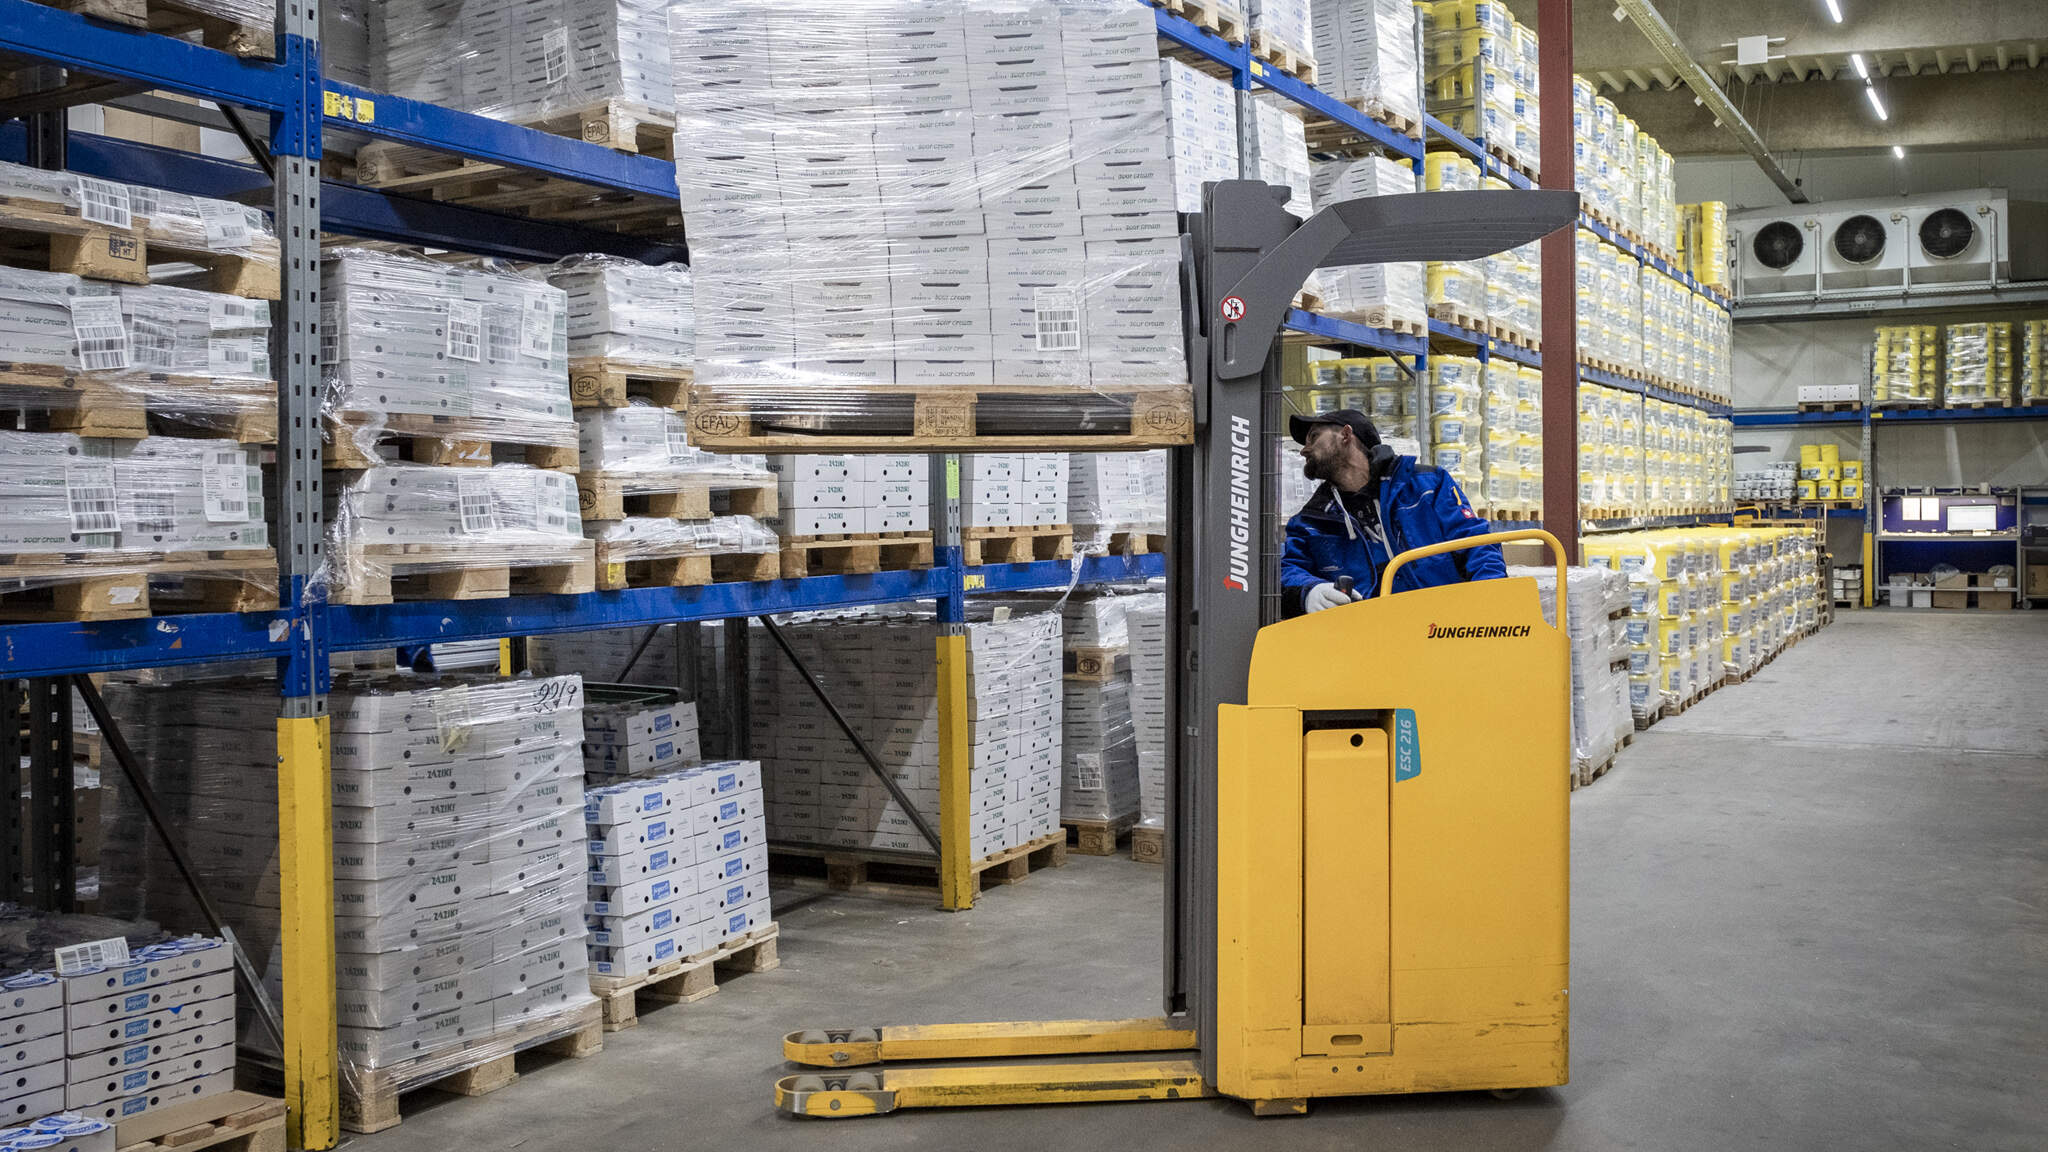 DACHSER was able to provide just-in-time delivery of packaging material stored for Apostel, while covering peaks that required transporting up to twice the usual volume of refrigerated goods from factories to retail warehouses.